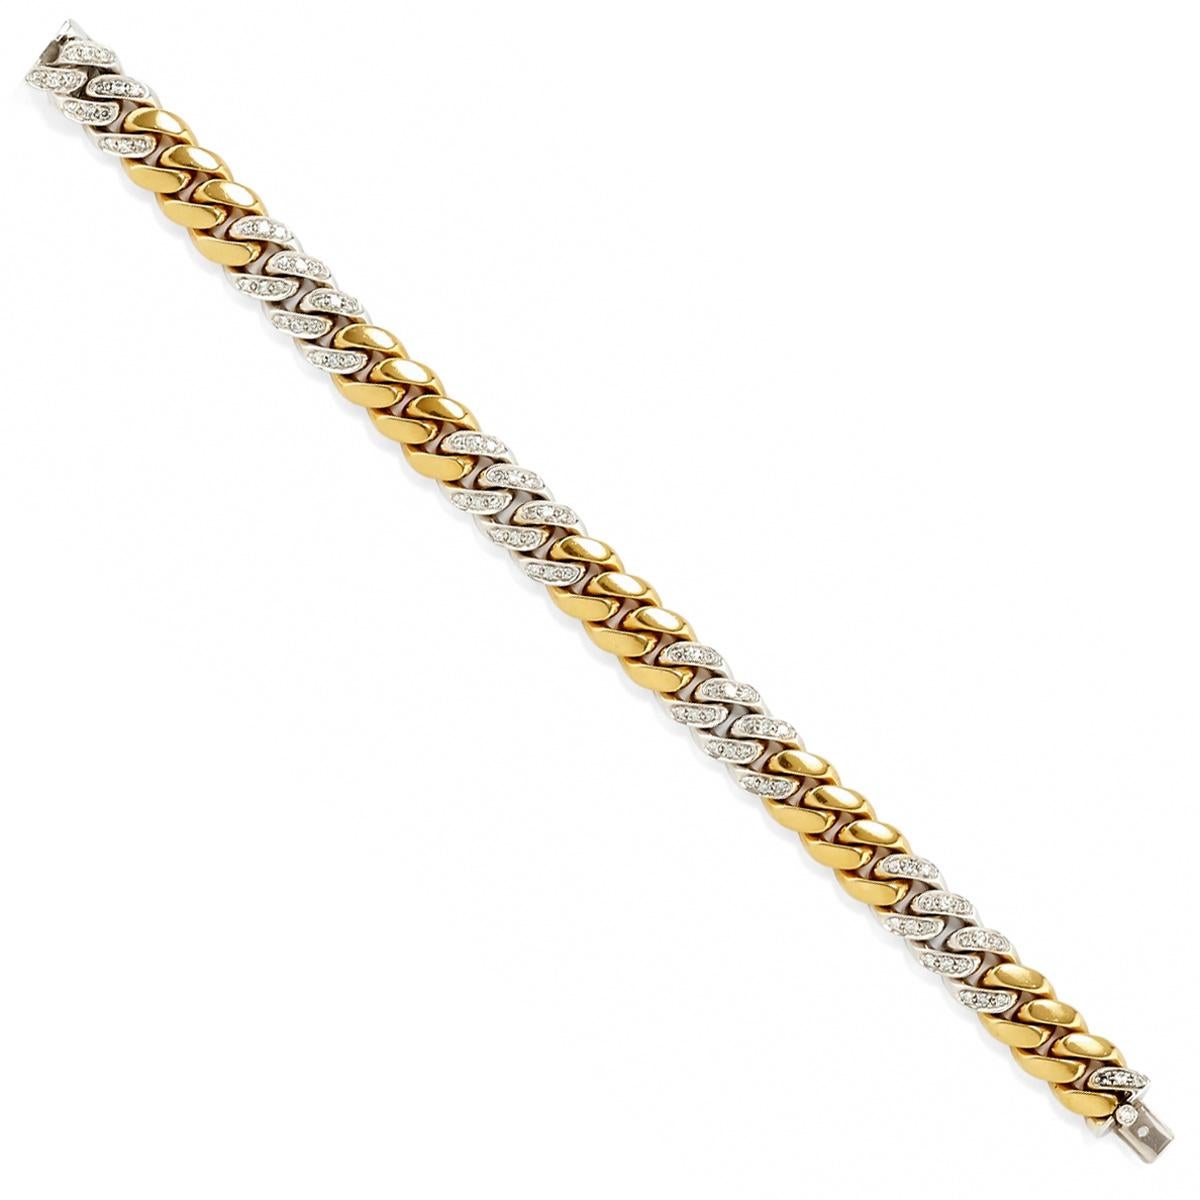 A classic must have for every wardrobe, this chic bracelet by Pomellato features 18k white and yellow alternating curb links encrusted with round brilliant cut diamonds. .90ct appx 